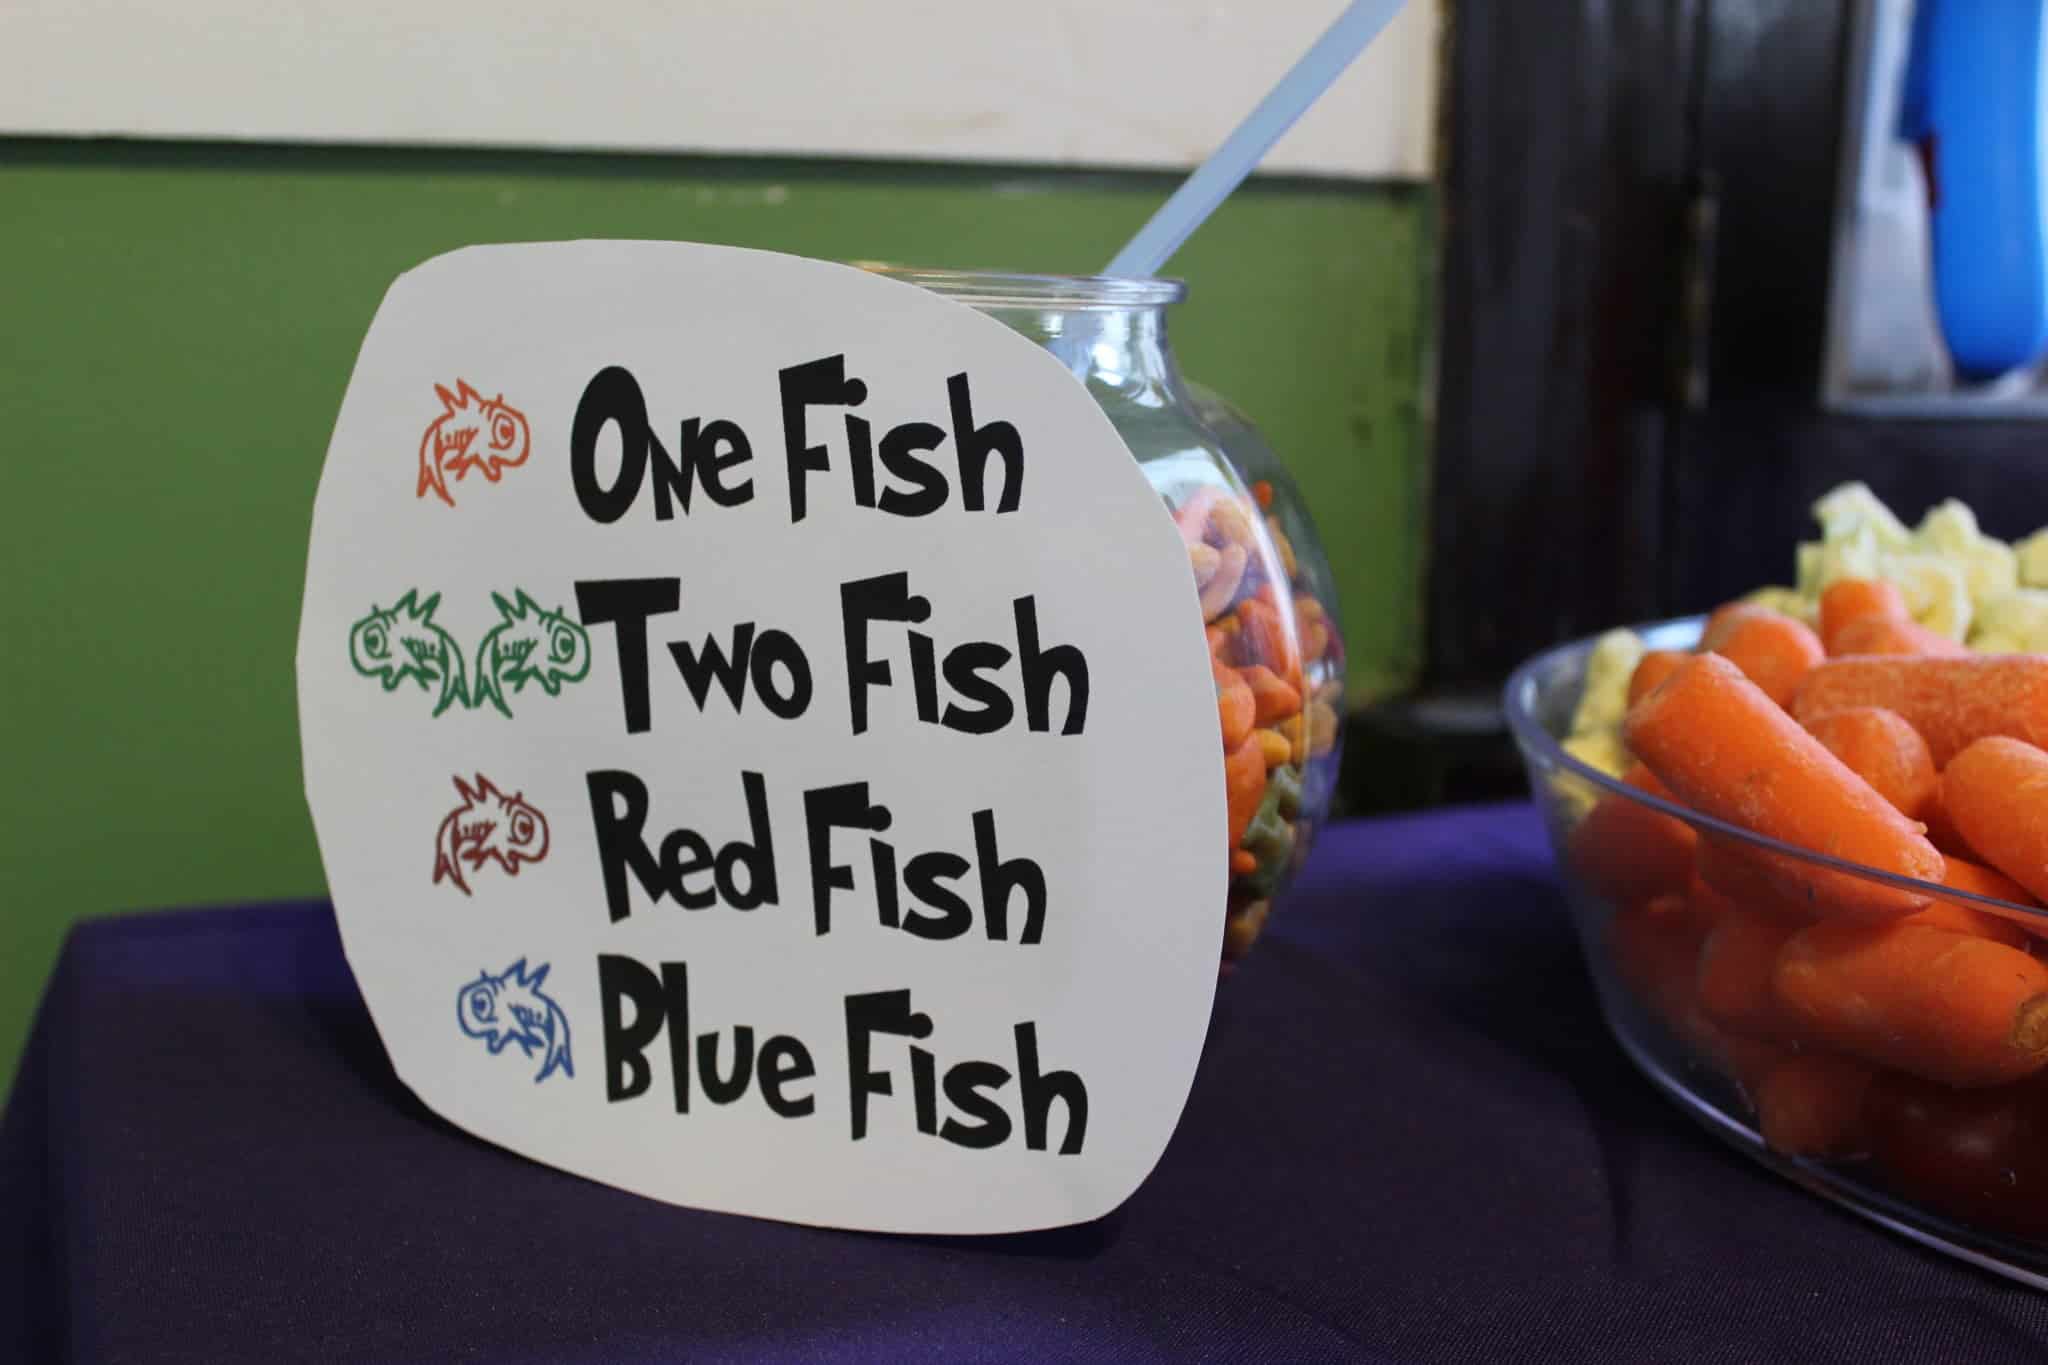 One fish two fish food idea